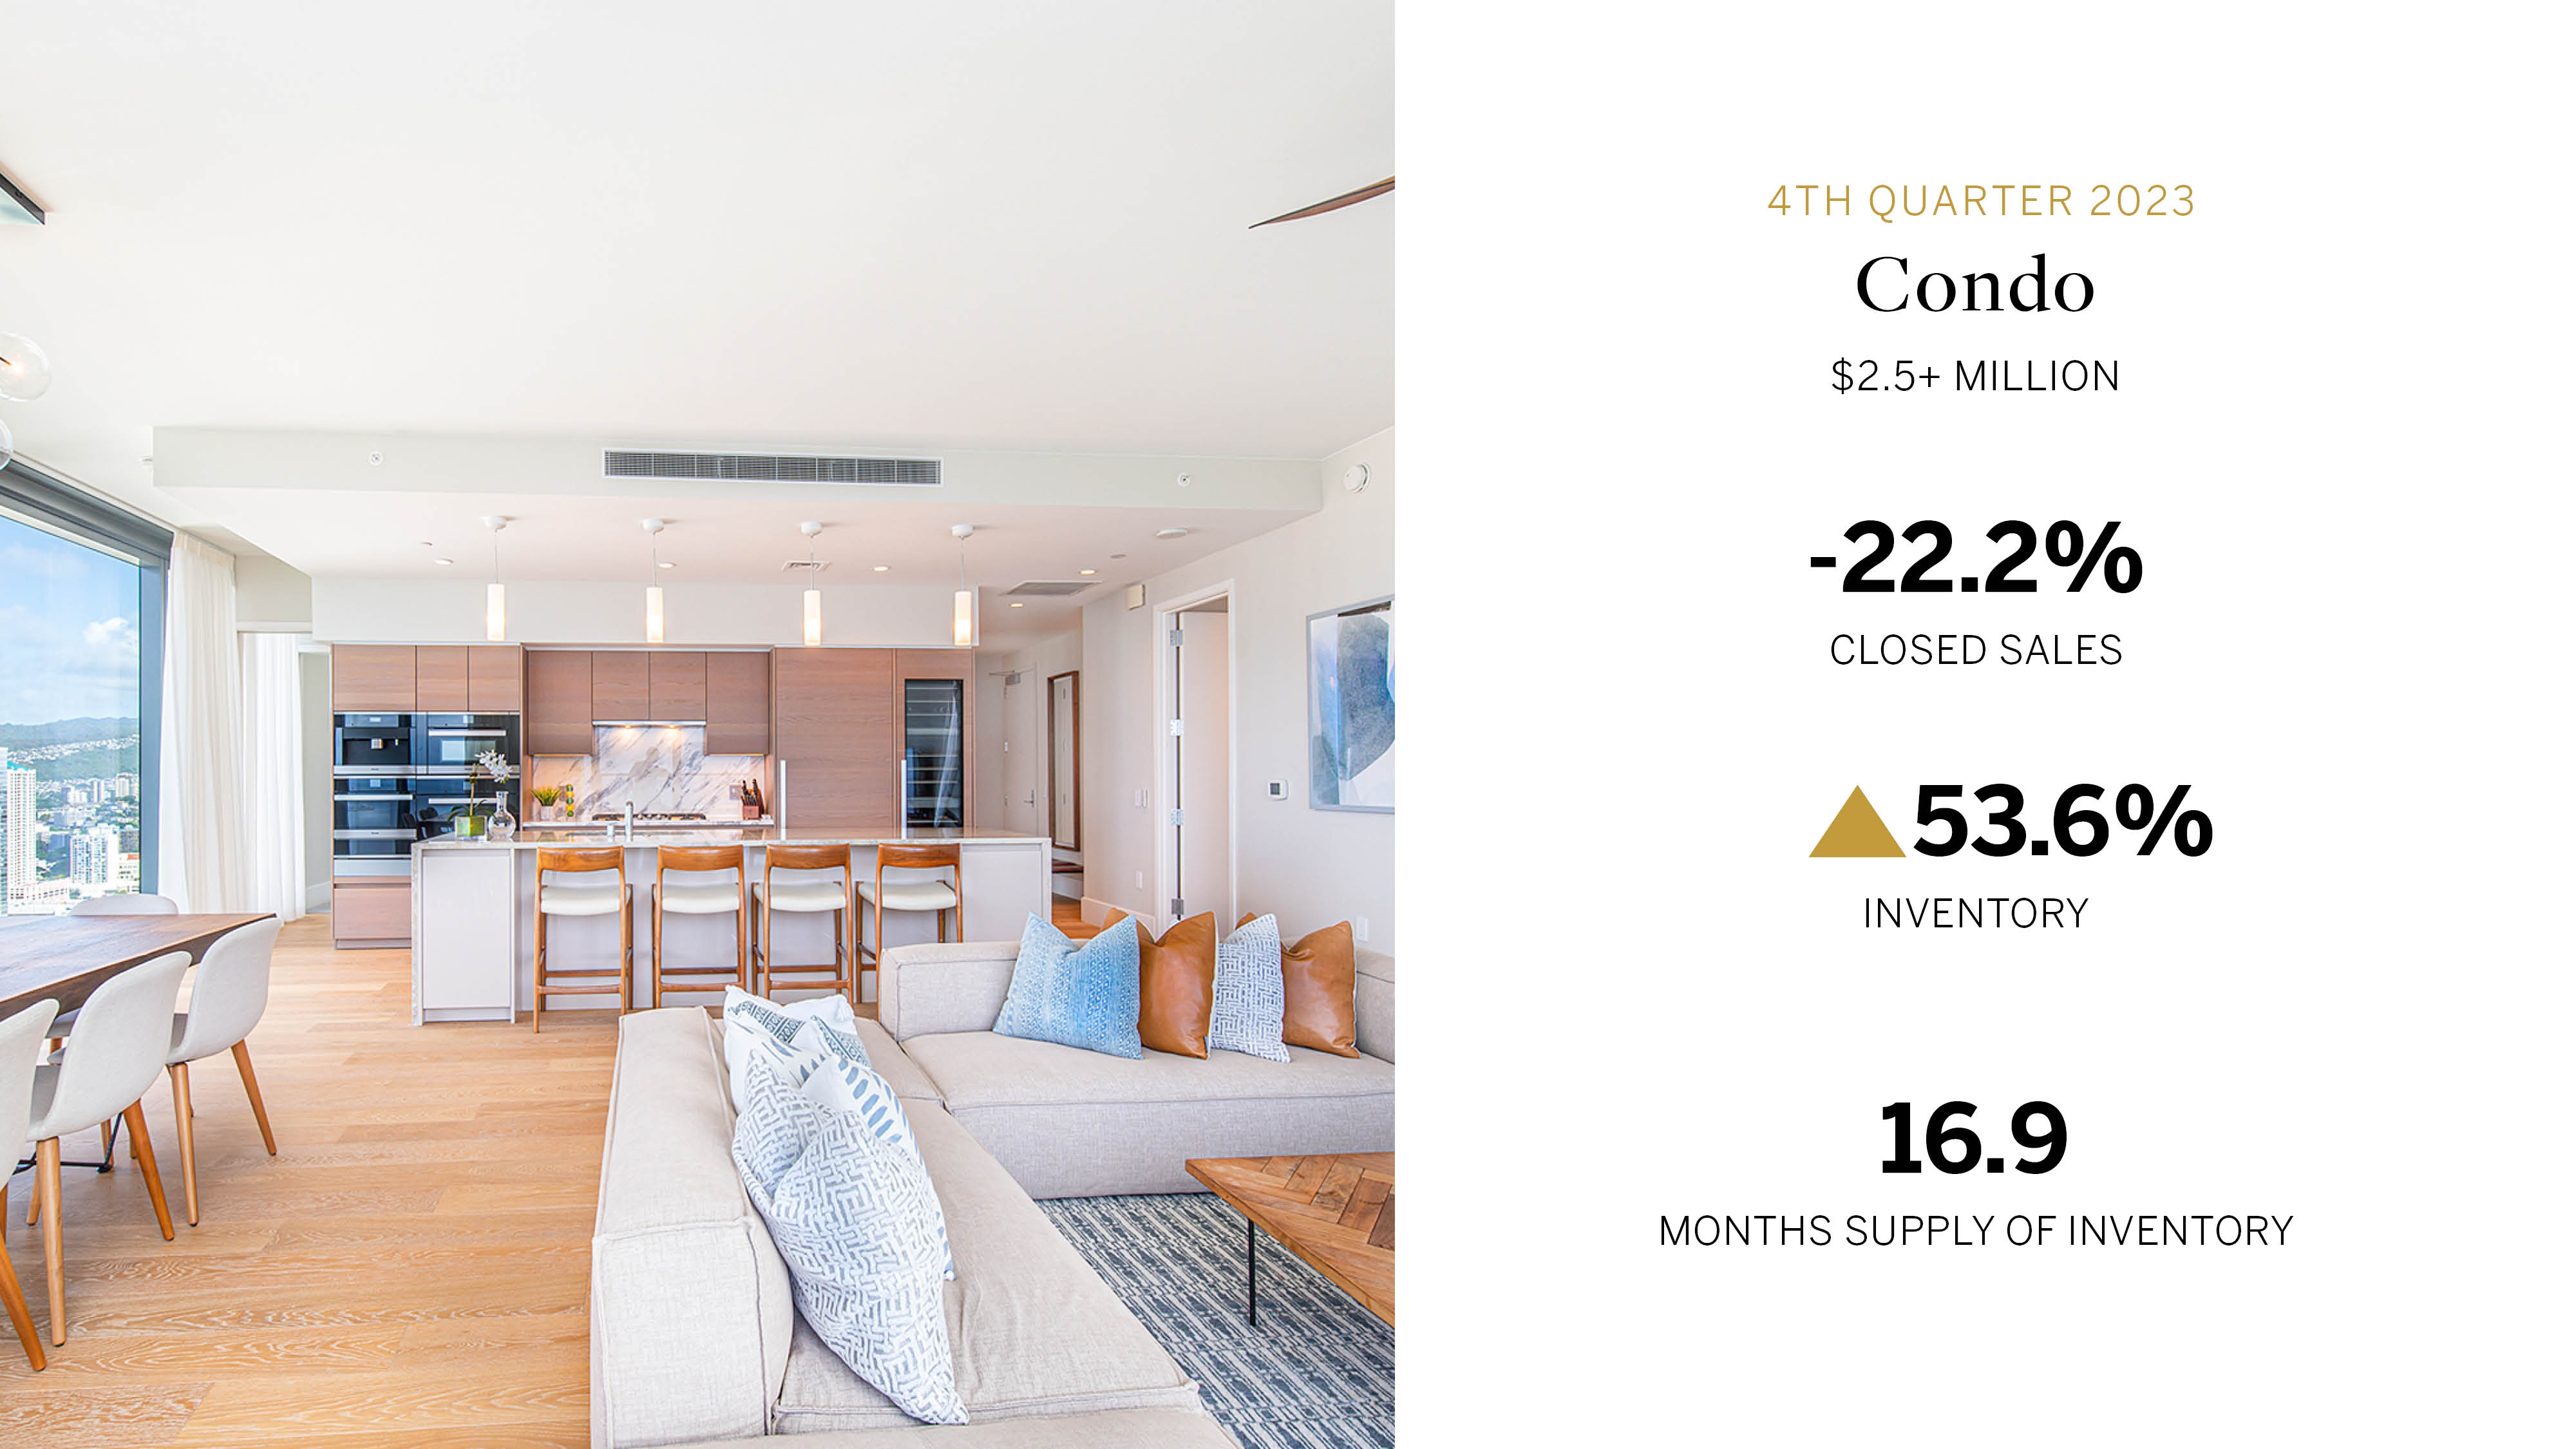 Image of an open floor plan condo unit with kitchen, dining, and living room on left side, luxury condo market stats on right side 